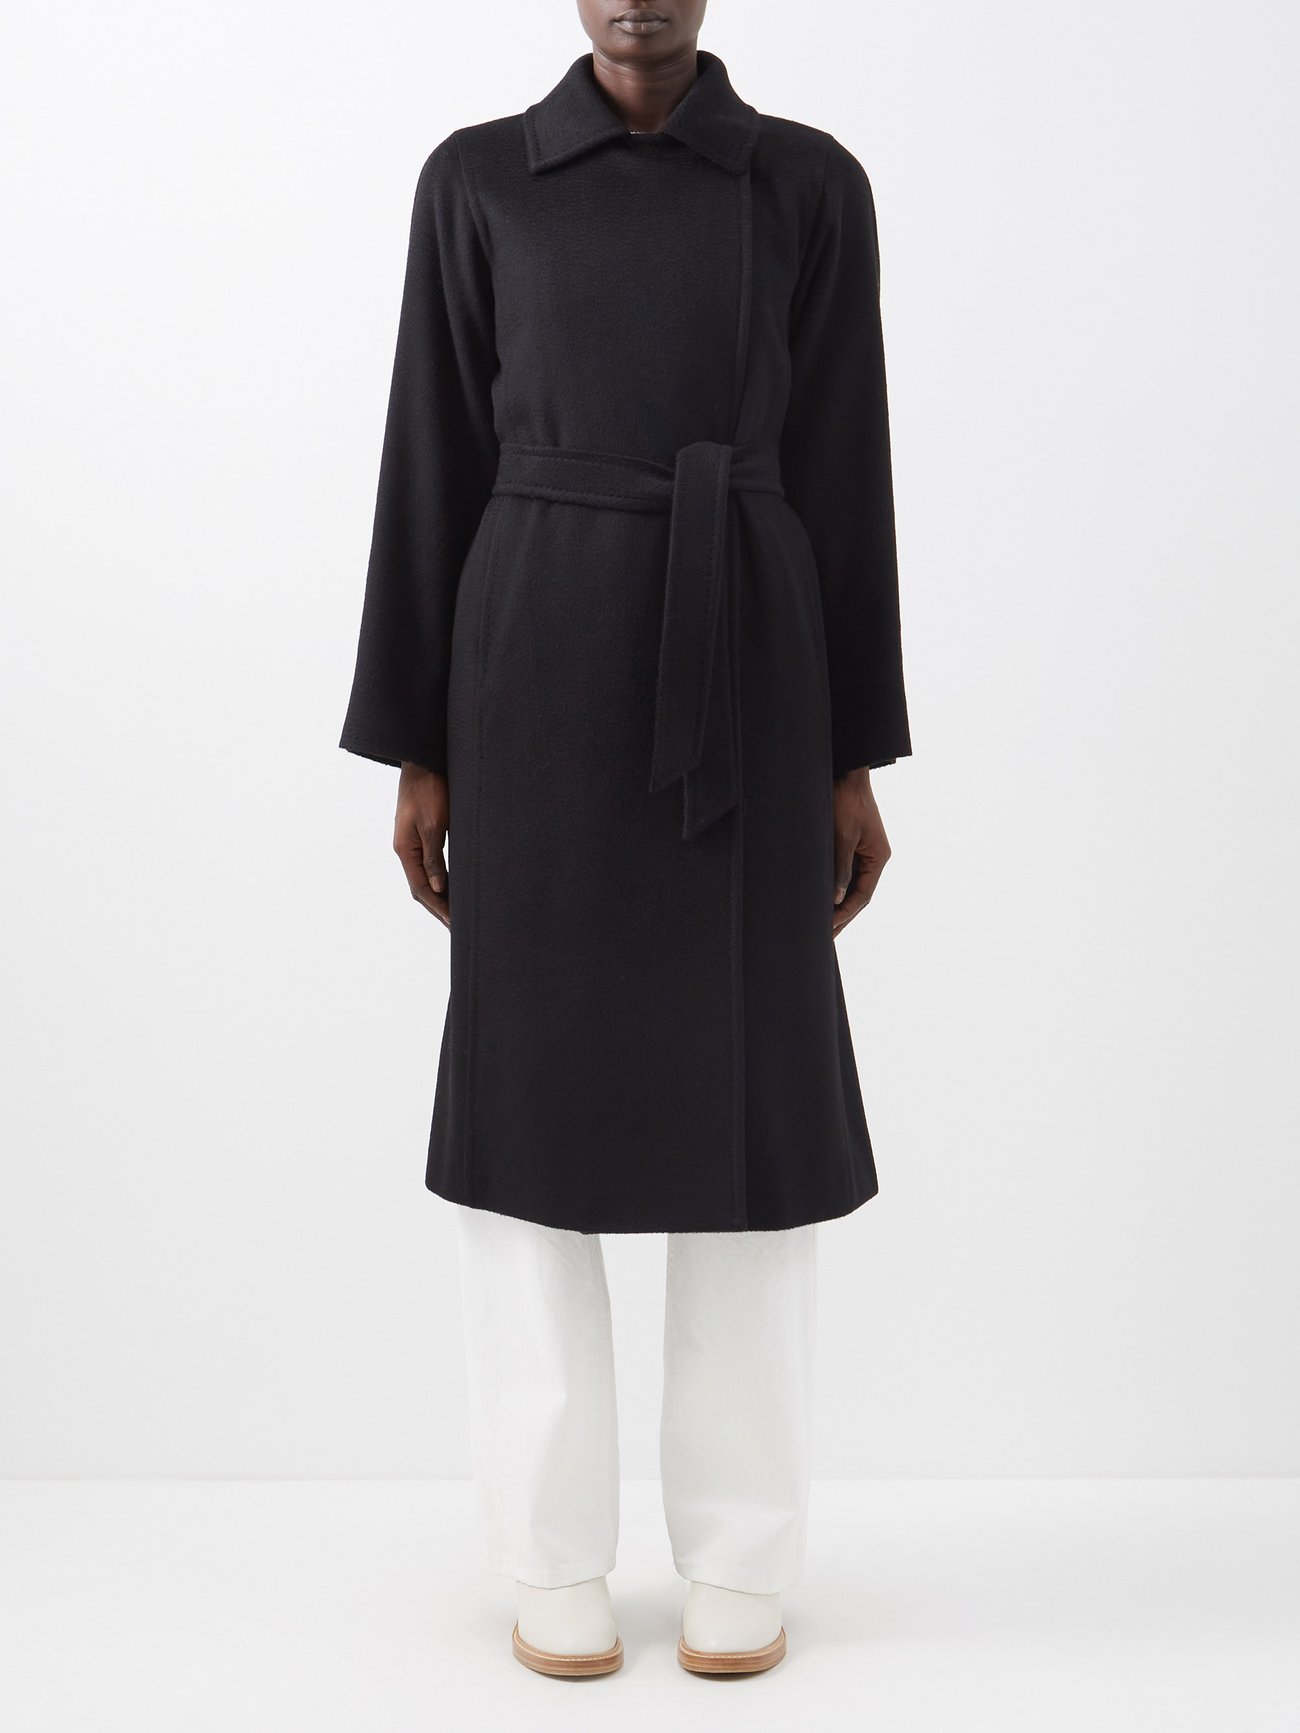 The Best Max Mara Coats For Women That Are So Timeless | Who What Wear UK